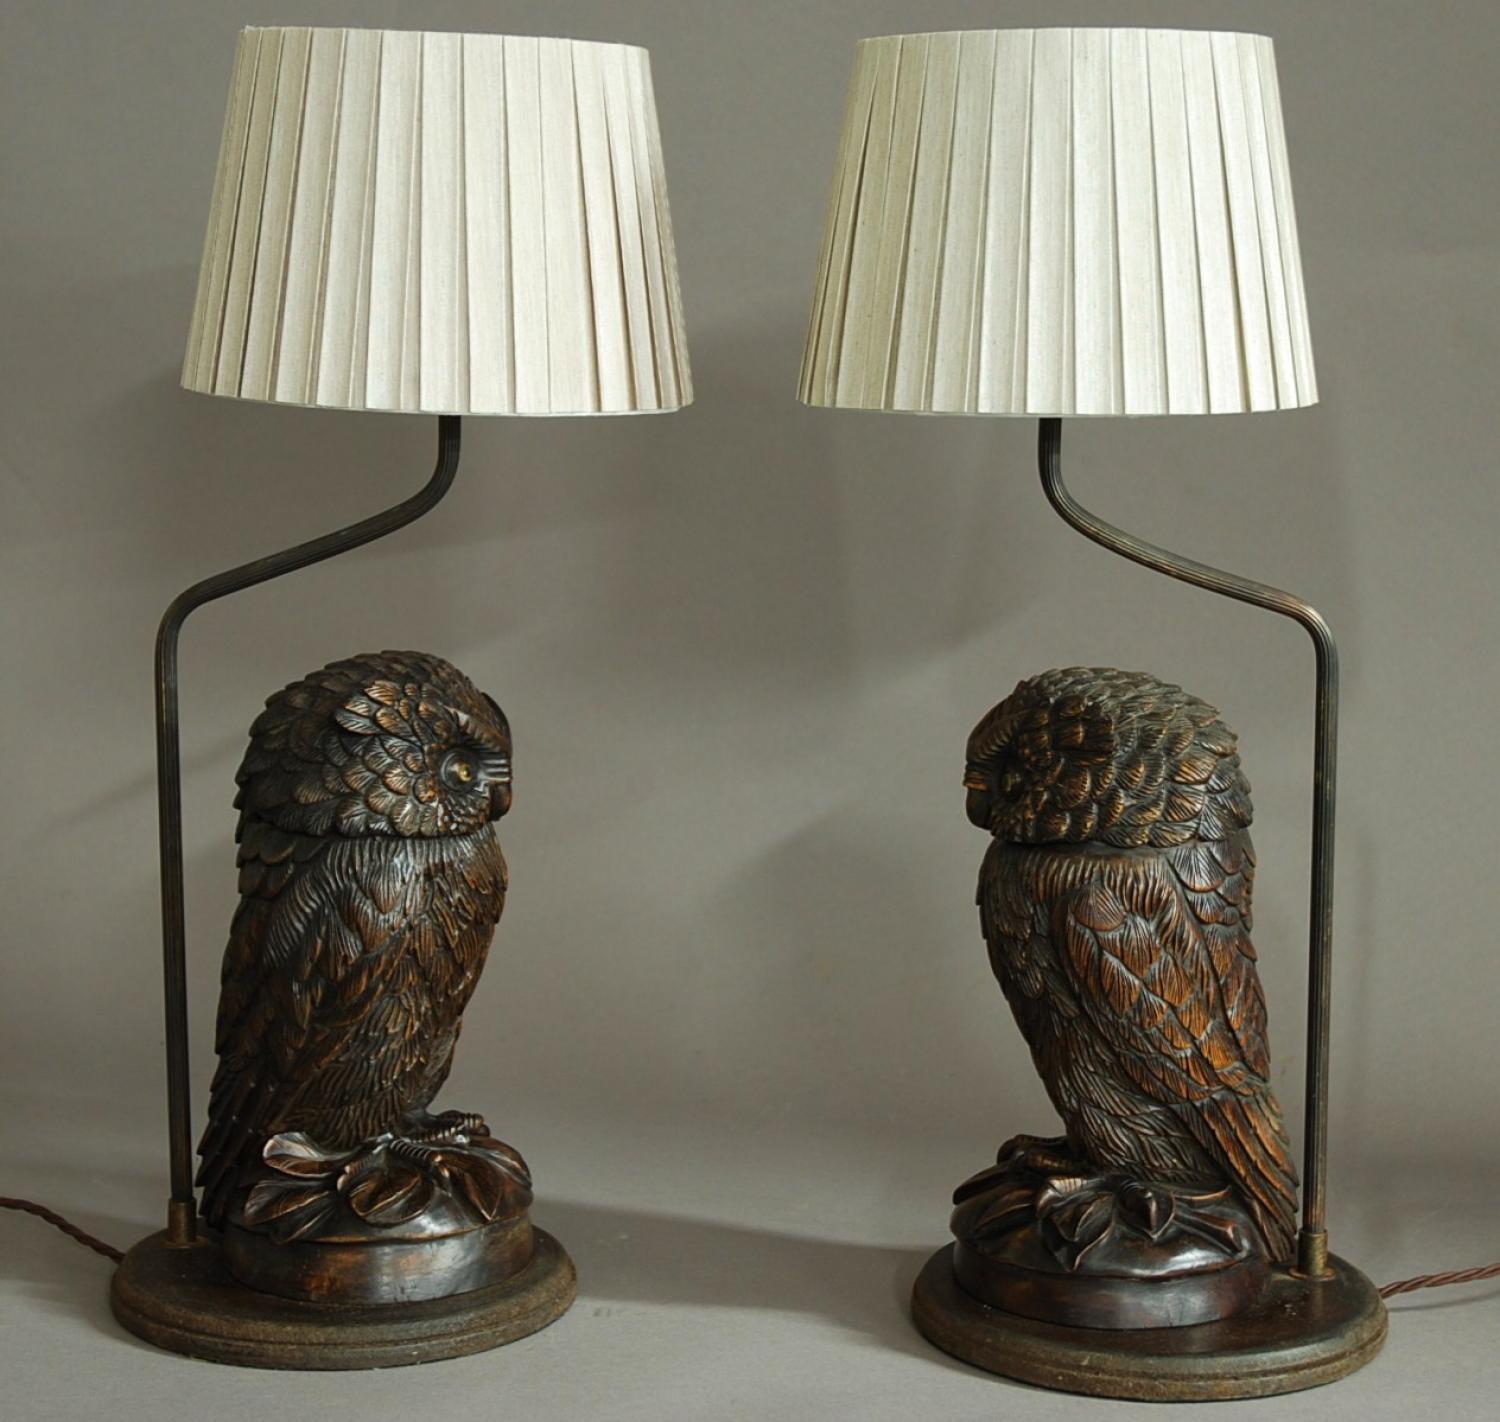 Superb pair of carved Black Forest owl lamps